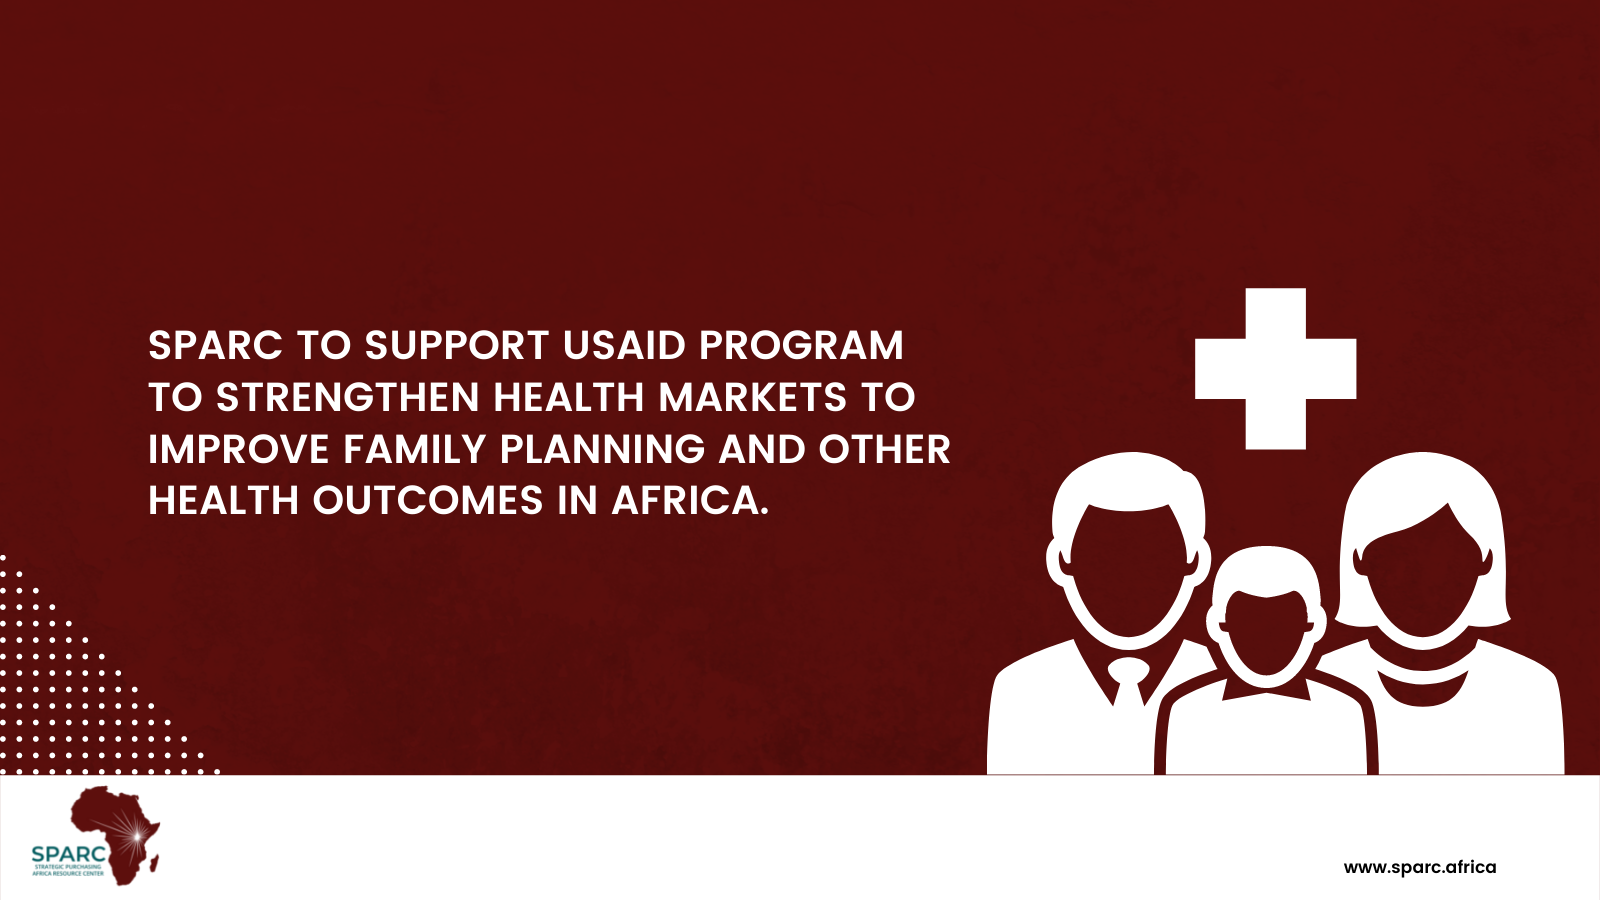 SPARC to Support USAID Program to Strengthen Health Markets to Improve Family Planning and Other Health Outcomes in Africa